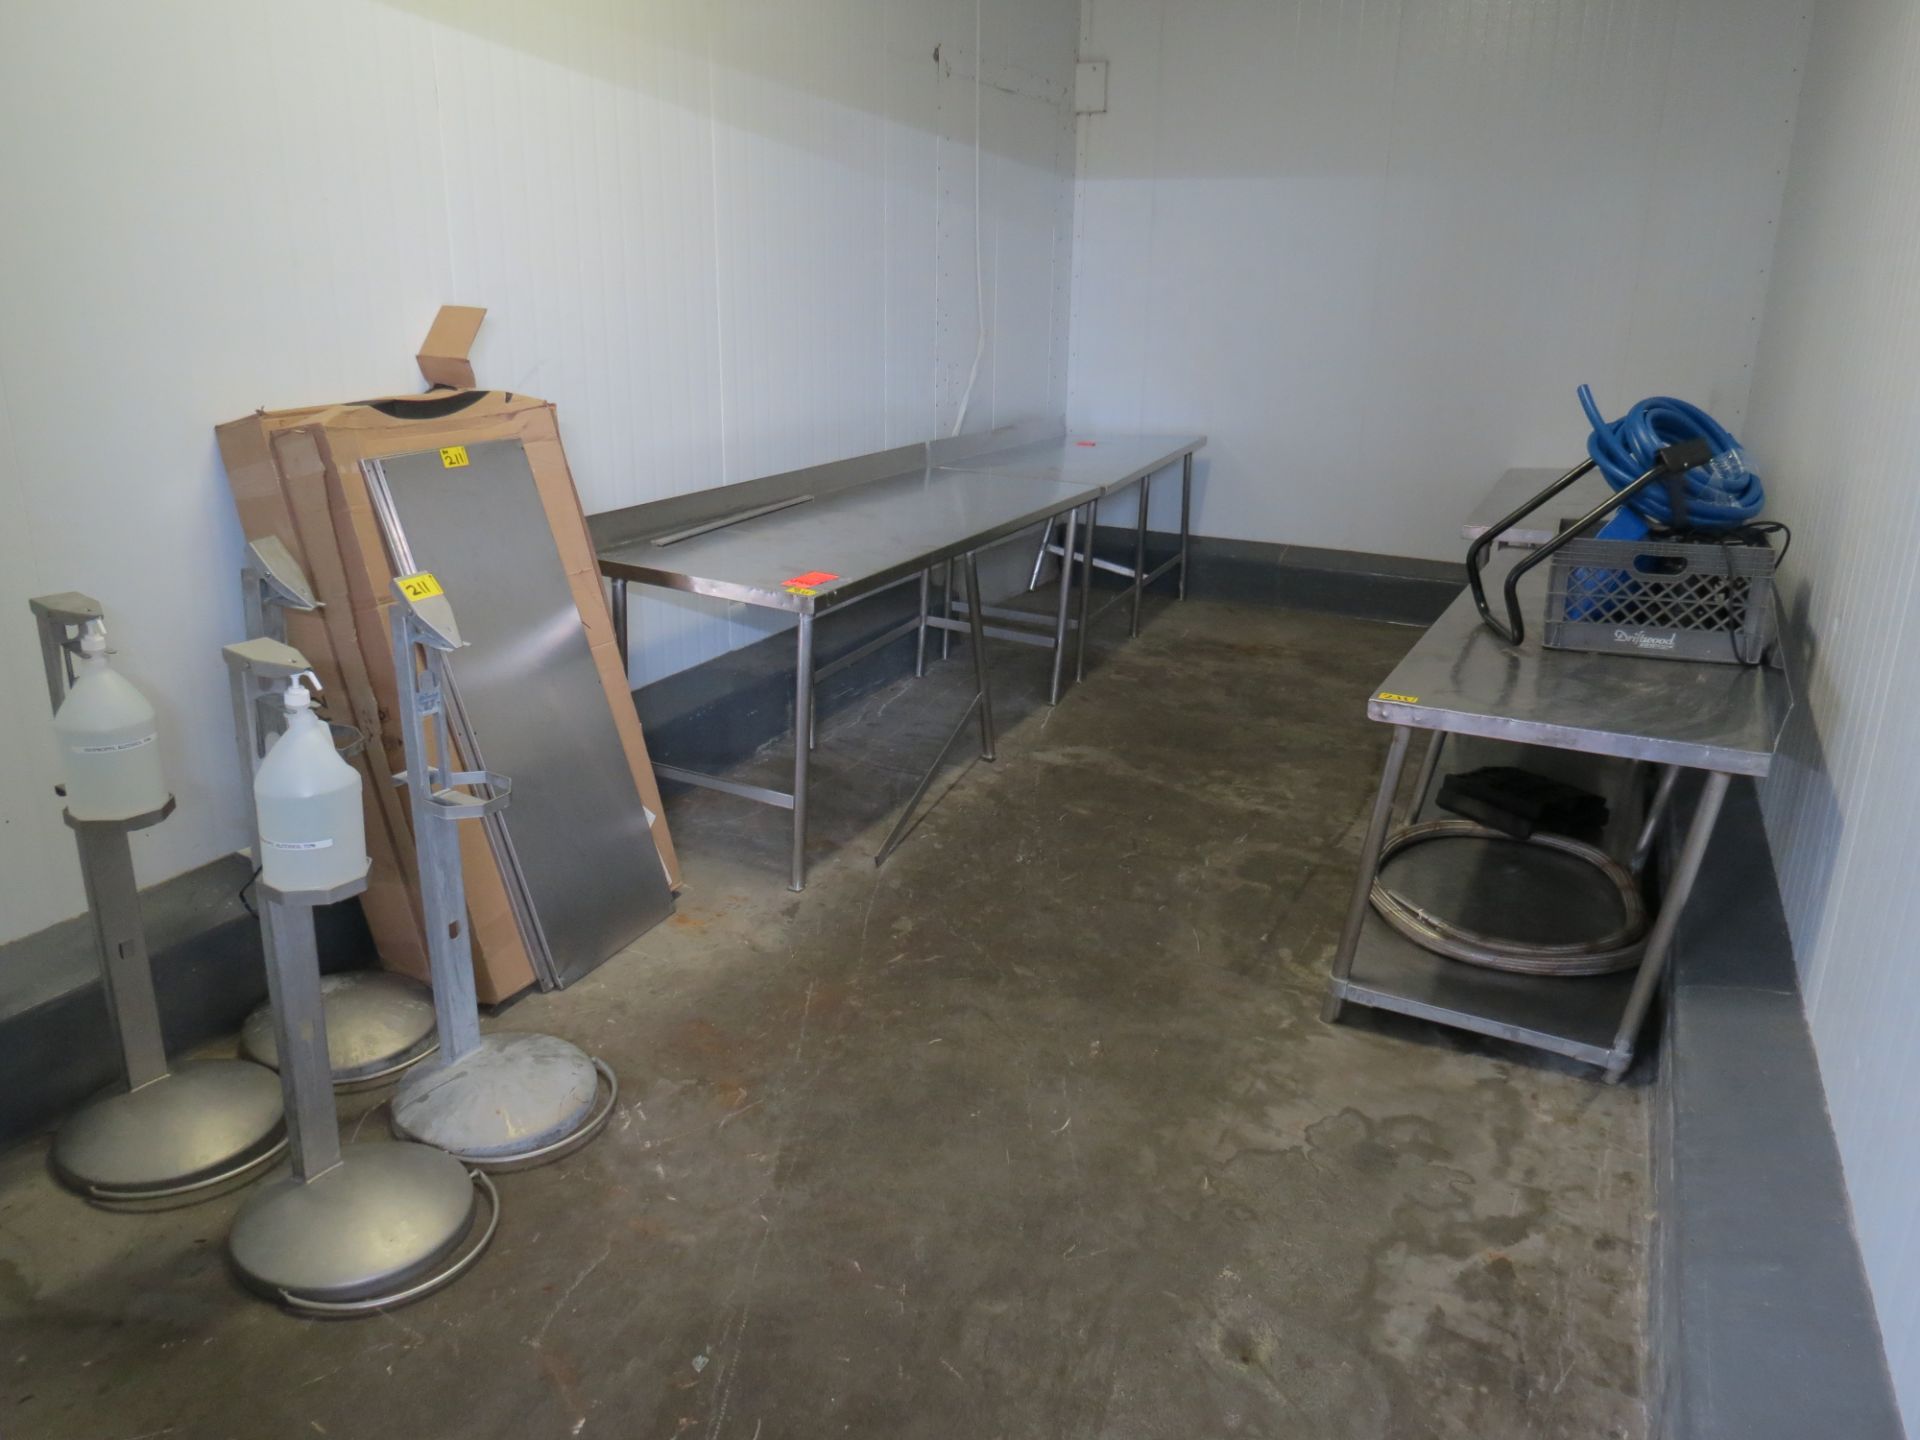 Lot of Damaged Stainless Steel Tables, Trays & Sanitizer Dispensers